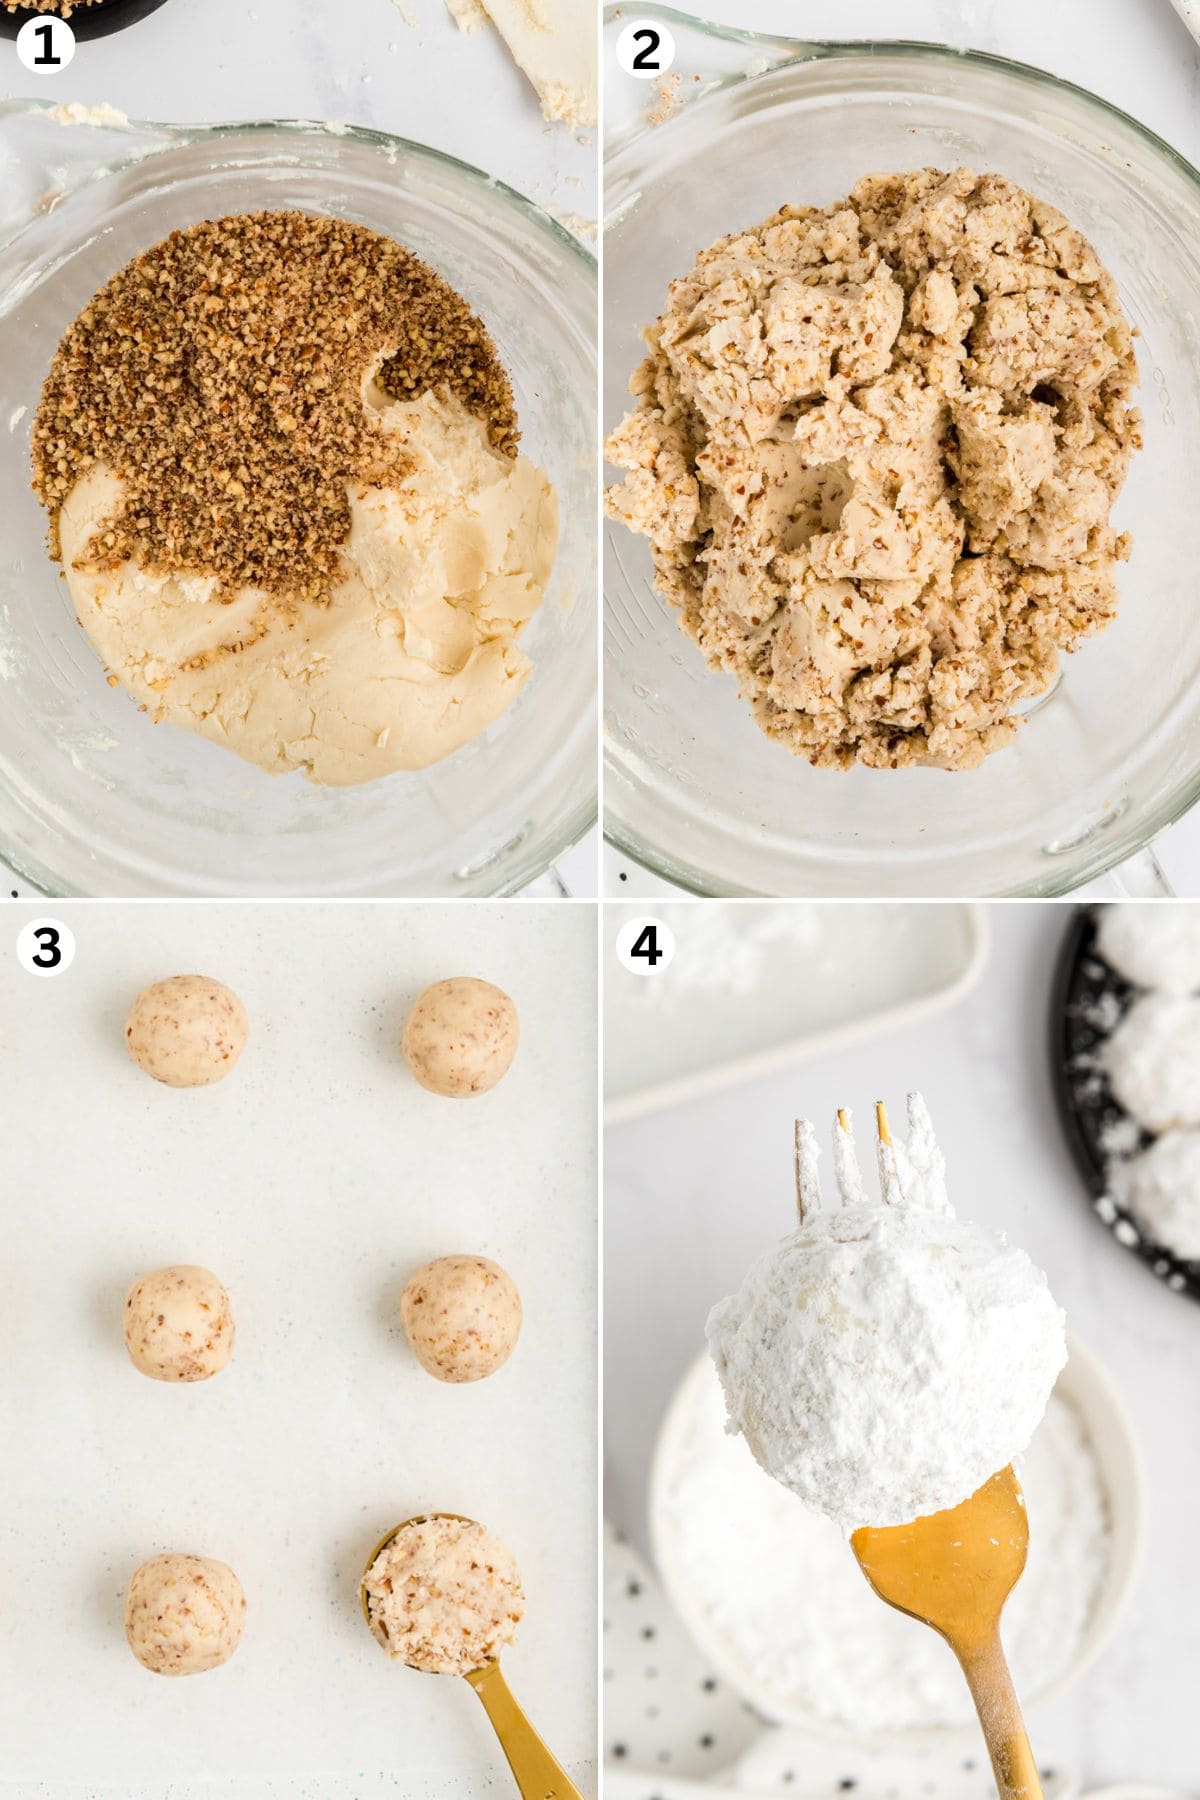 mix ingredients in mixing bowl. scoop and roll into balls and line up in baking sheet. cover with powdered sugar.